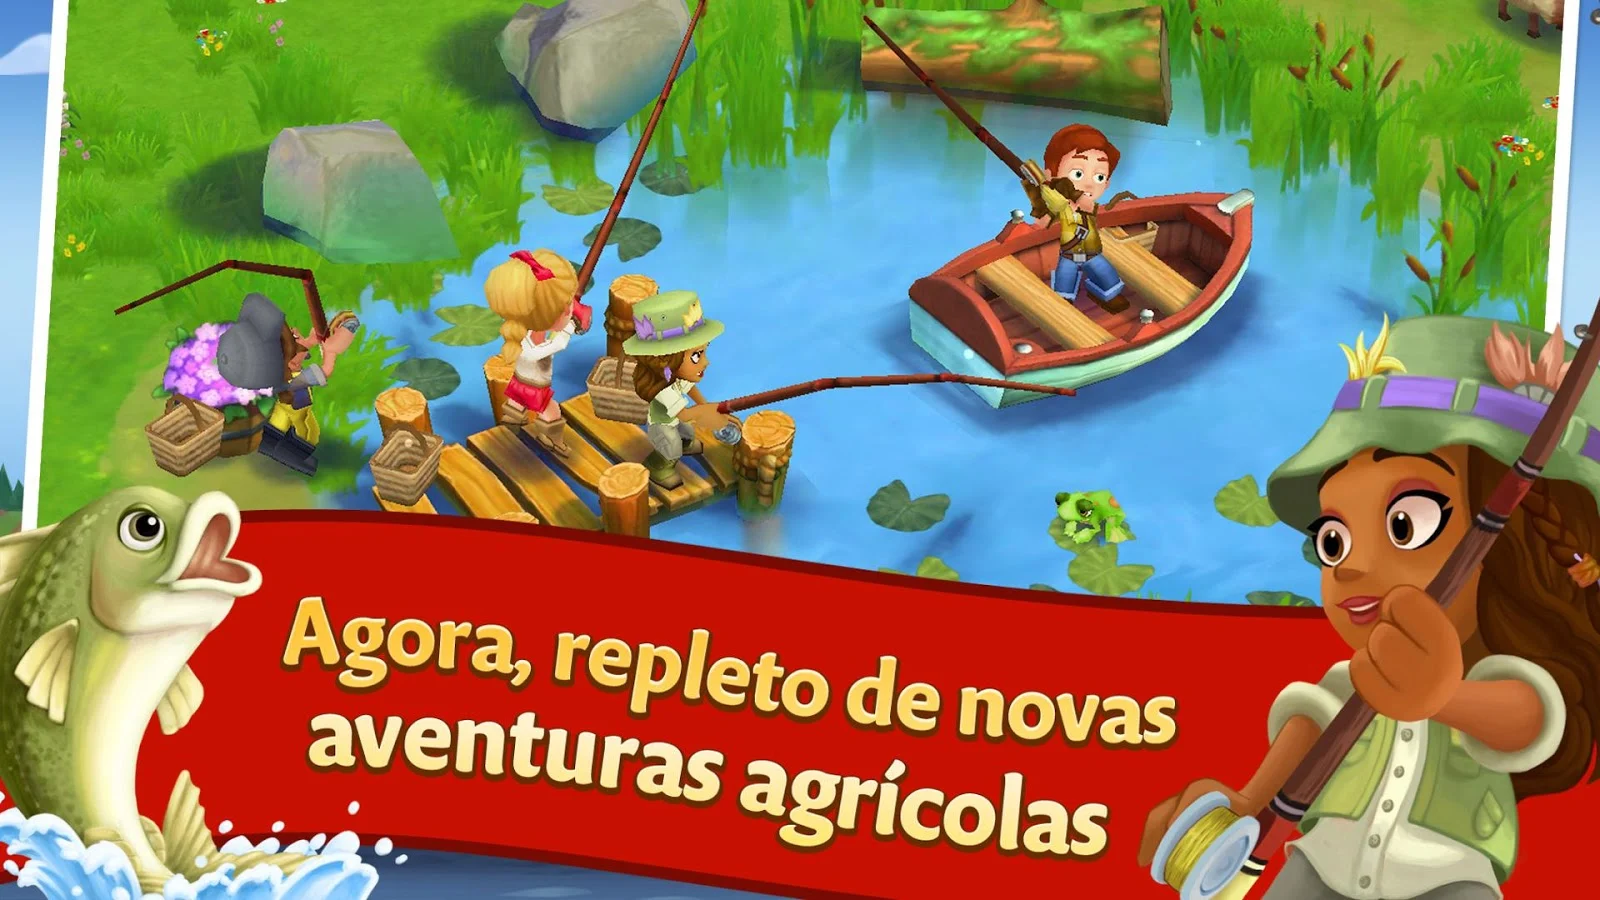 Download - FarmVille 2 Country Escape v11.6.3117 Apk Mod [Chaves Infinitas] - Winew